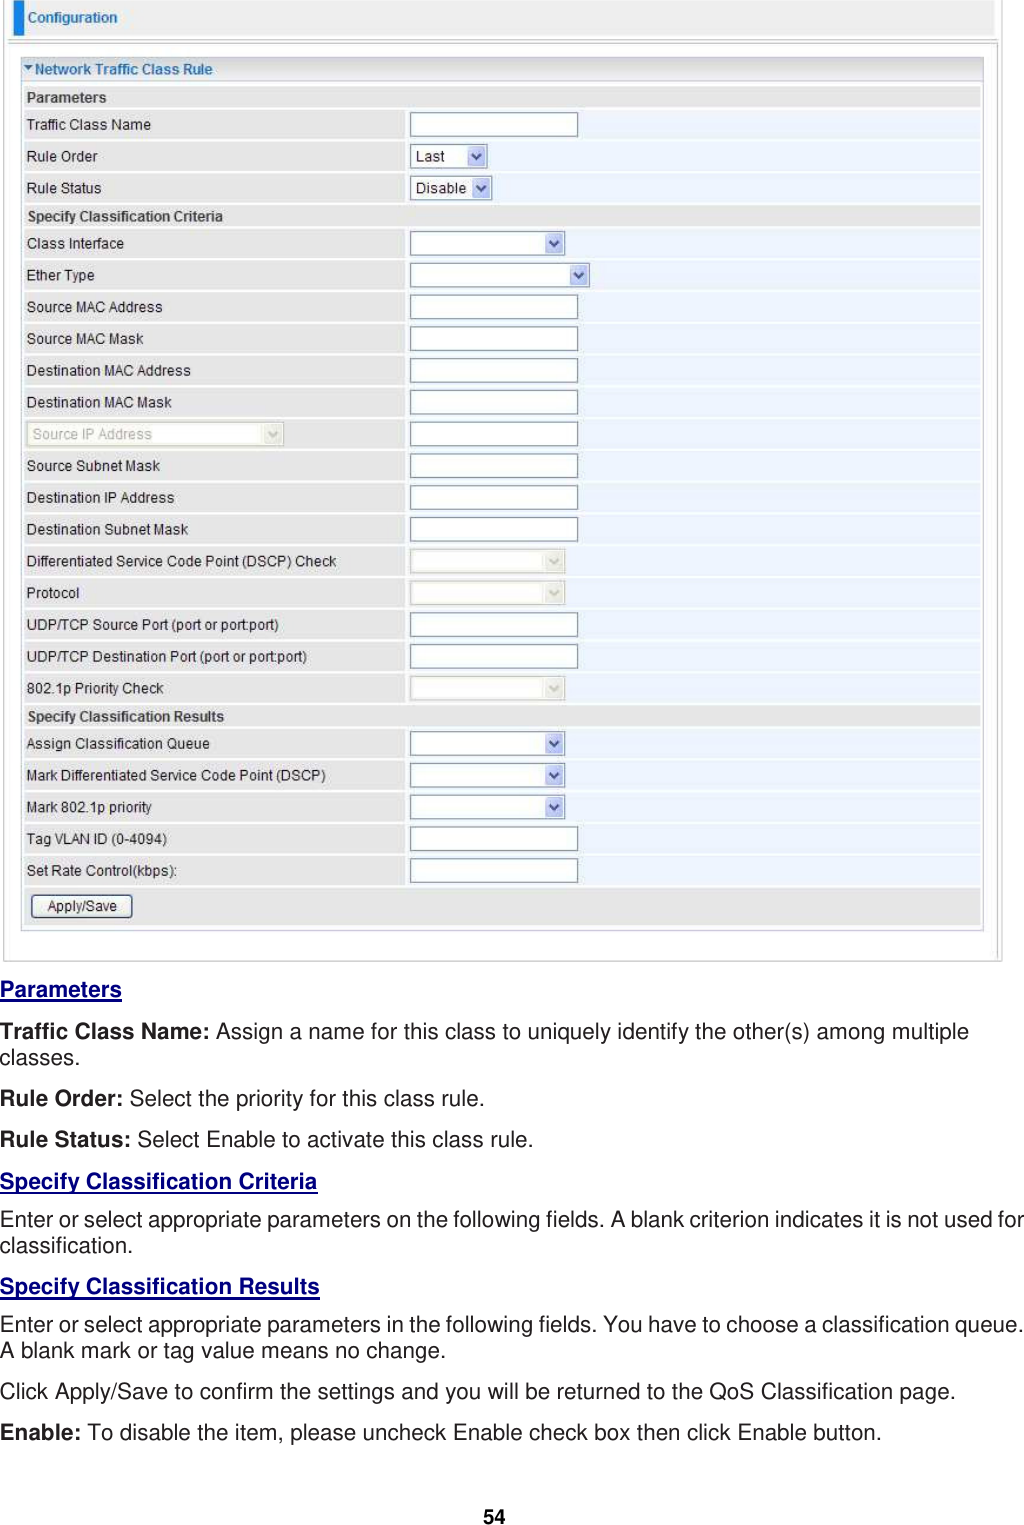  54  Parameters Traffic Class Name: Assign a name for this class to uniquely identify the other(s) among multiple classes. Rule Order: Select the priority for this class rule. Rule Status: Select Enable to activate this class rule. Specify Classification Criteria Enter or select appropriate parameters on the following fields. A blank criterion indicates it is not used for classification. Specify Classification Results Enter or select appropriate parameters in the following fields. You have to choose a classification queue. A blank mark or tag value means no change. Click Apply/Save to confirm the settings and you will be returned to the QoS Classification page. Enable: To disable the item, please uncheck Enable check box then click Enable button. 